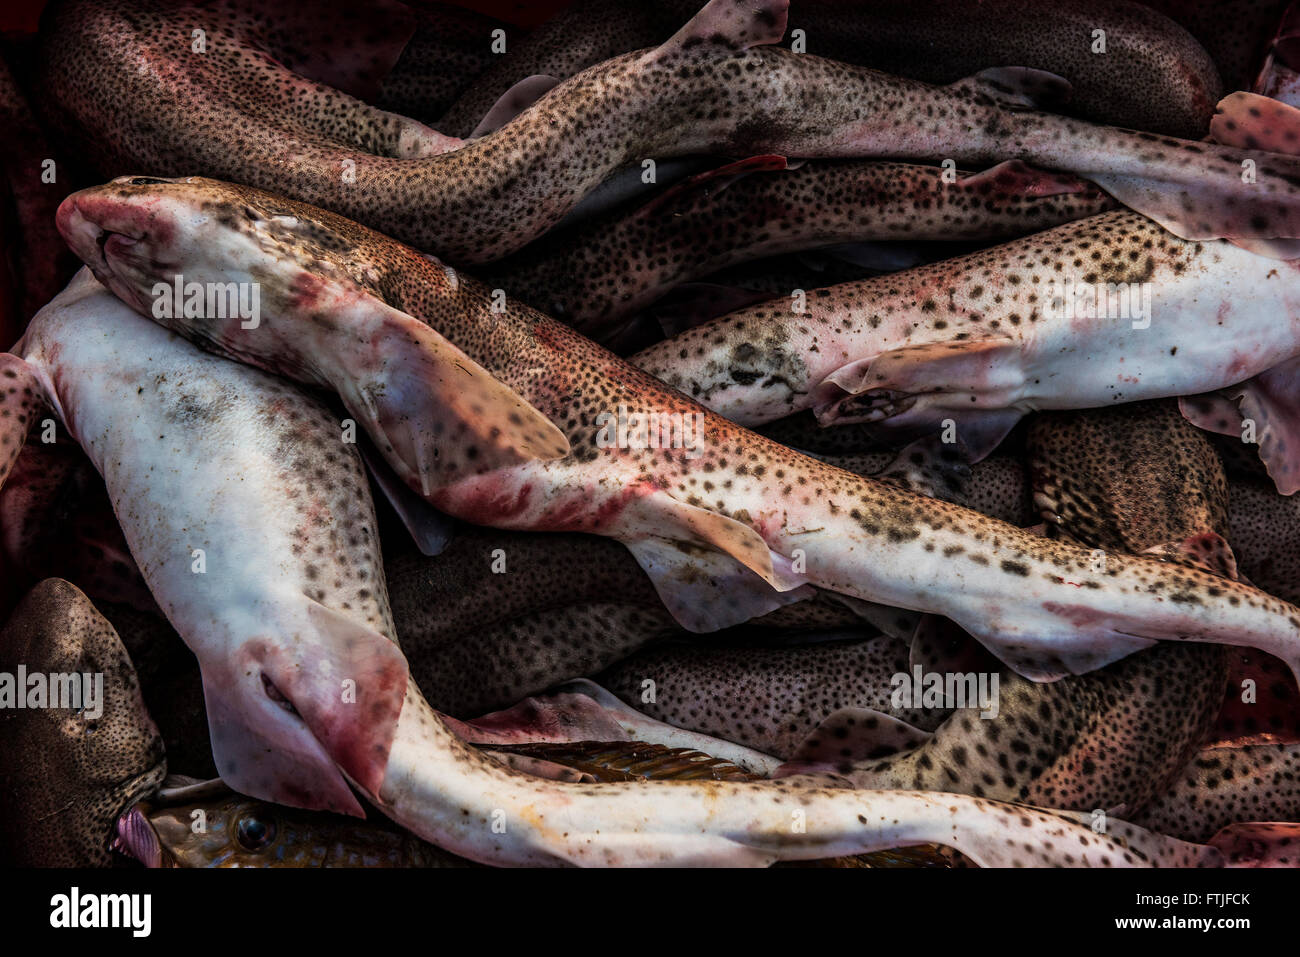 Fish caught and landed at Newquay harbour in Cornwall. Stock Photo